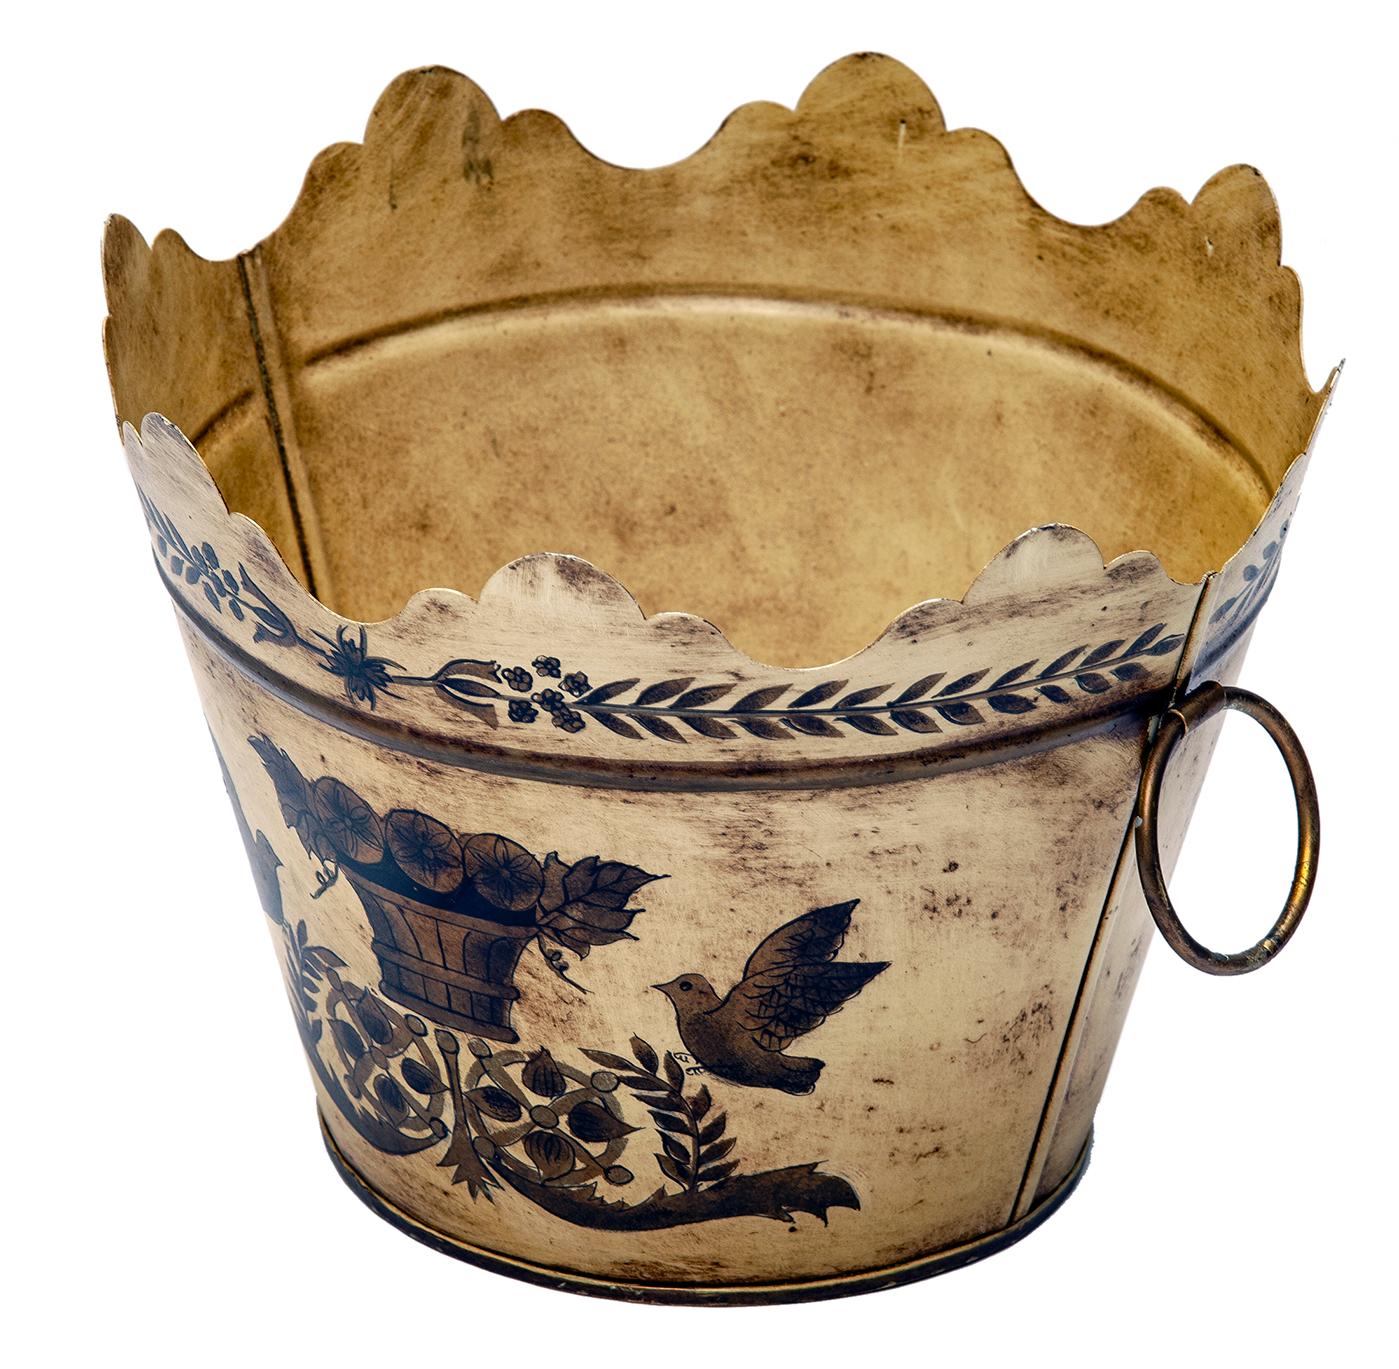 Hand painted European metal vessel decorated with flowers & birds, beautifully enhanced with a decorative 